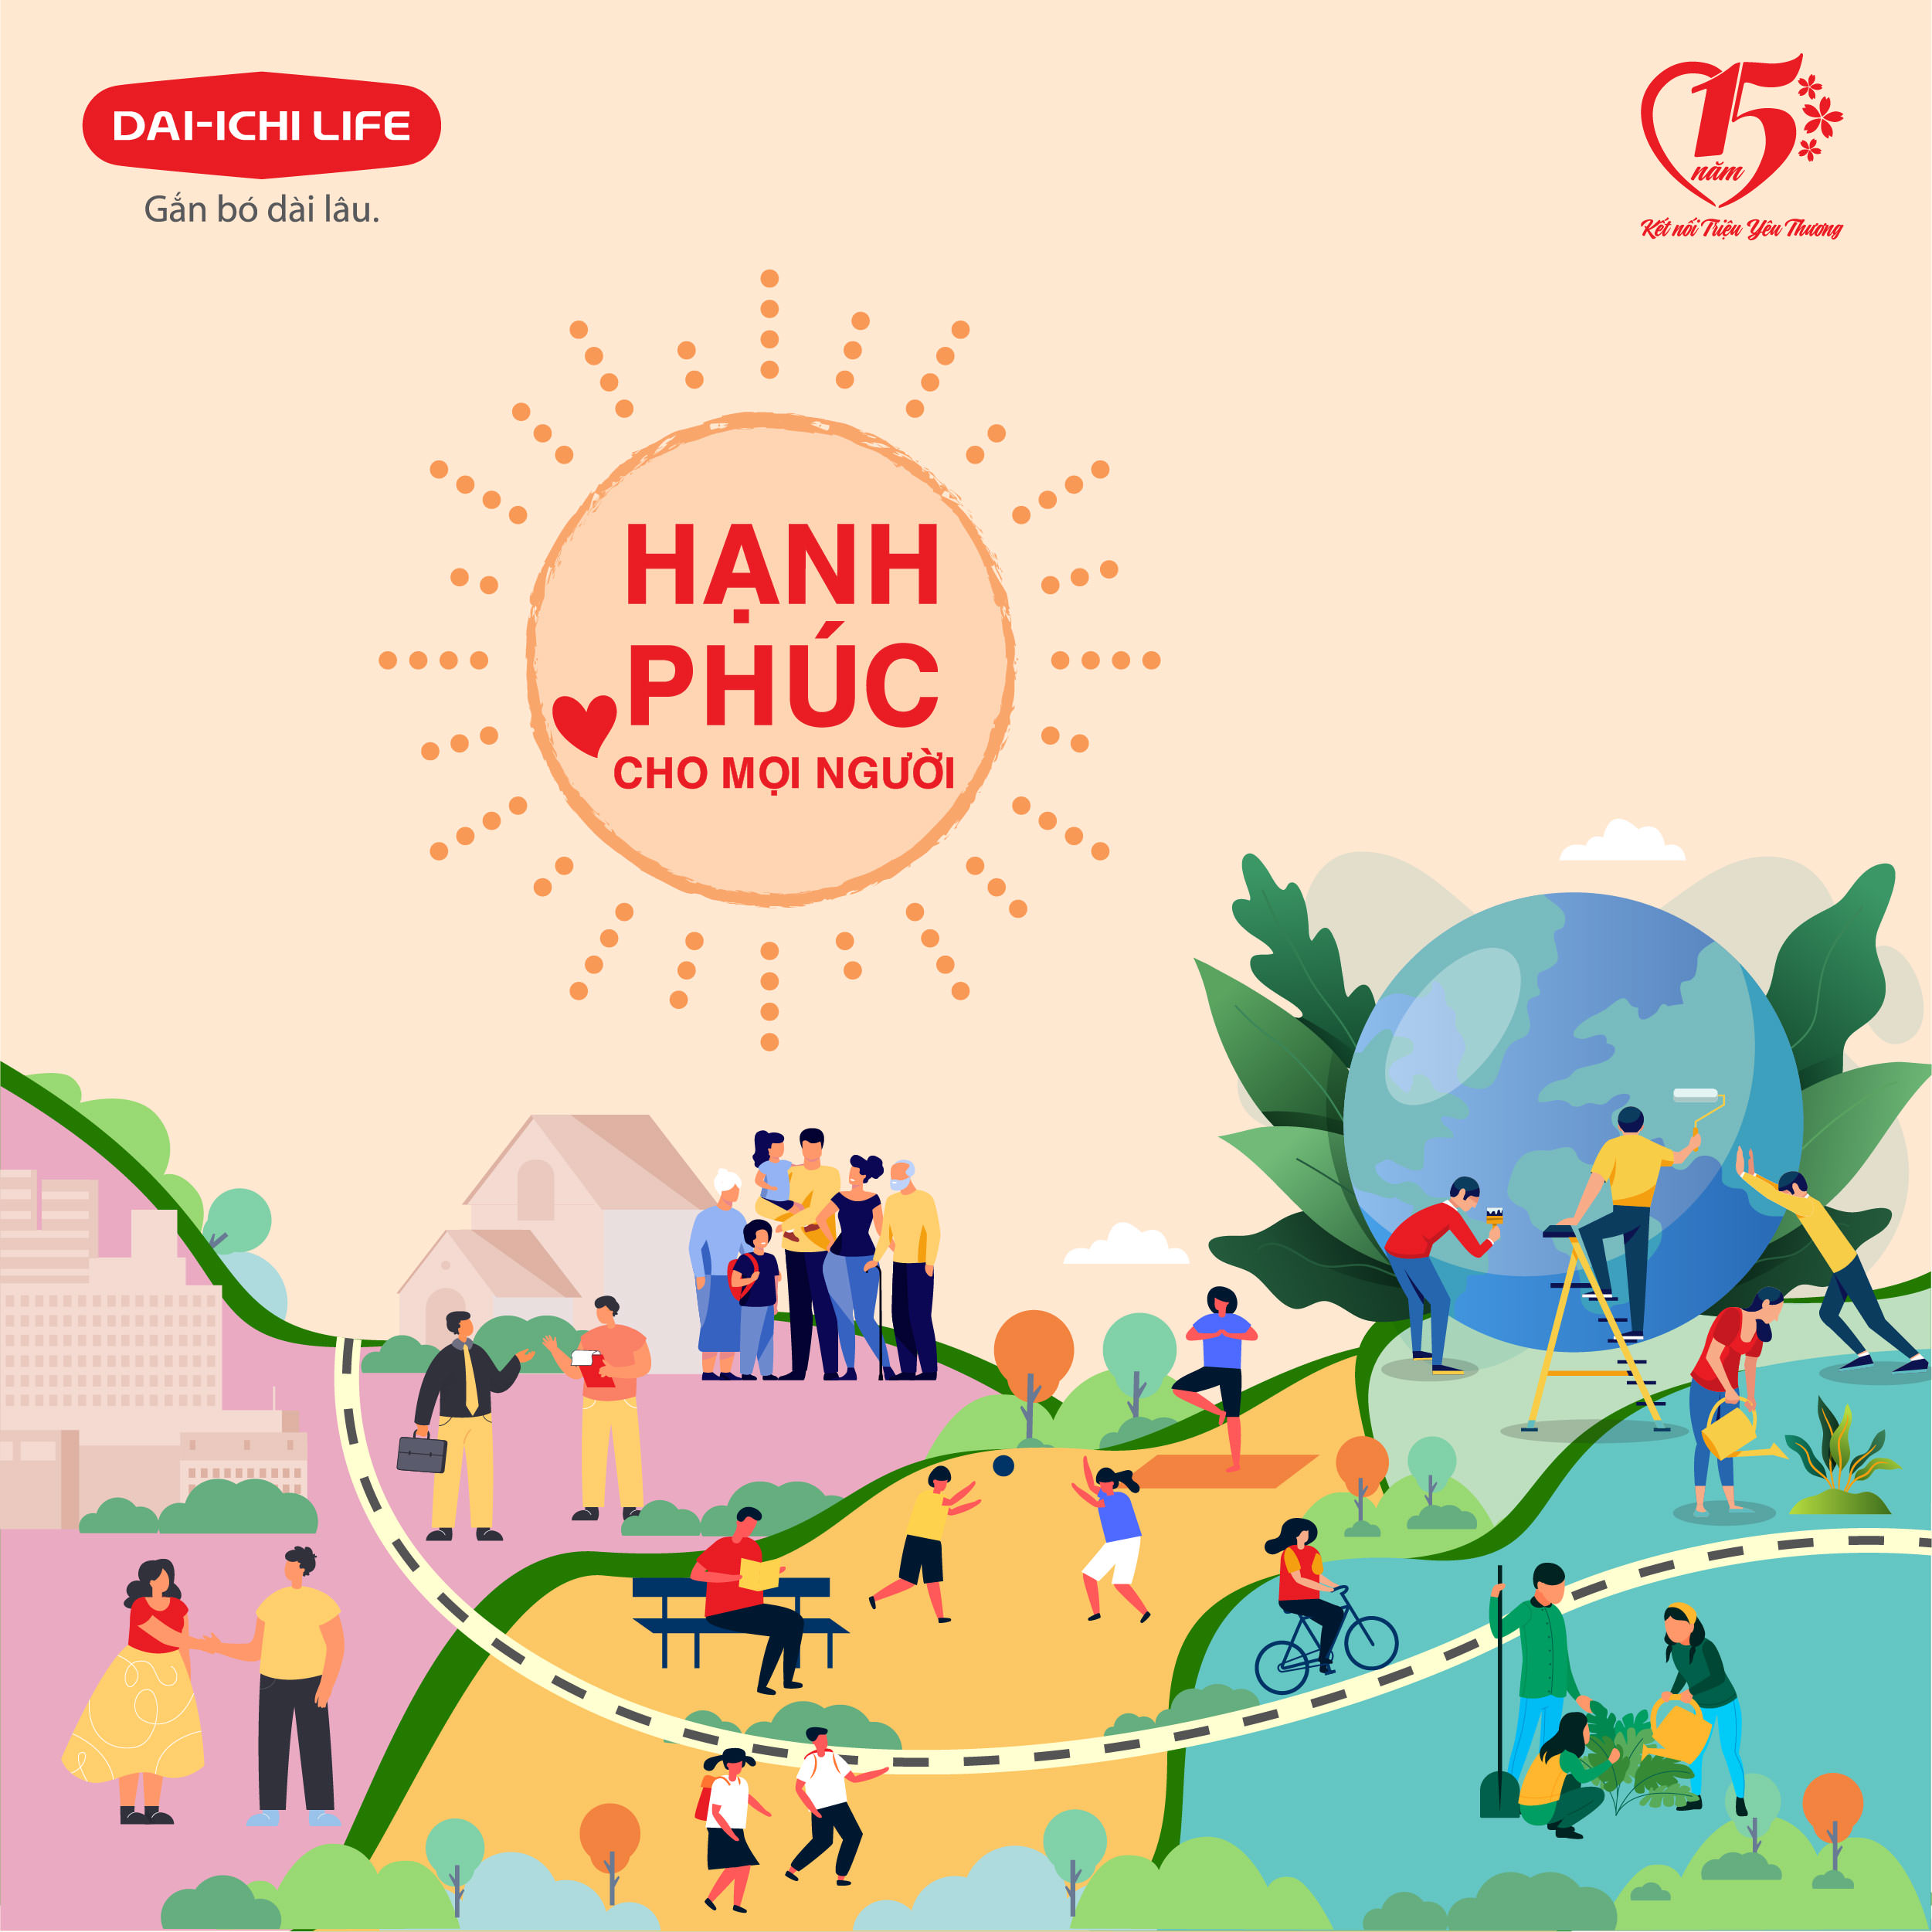 Dai-ichi Life Vietnam launches “Connect to Love – Happiness for everyone” Project